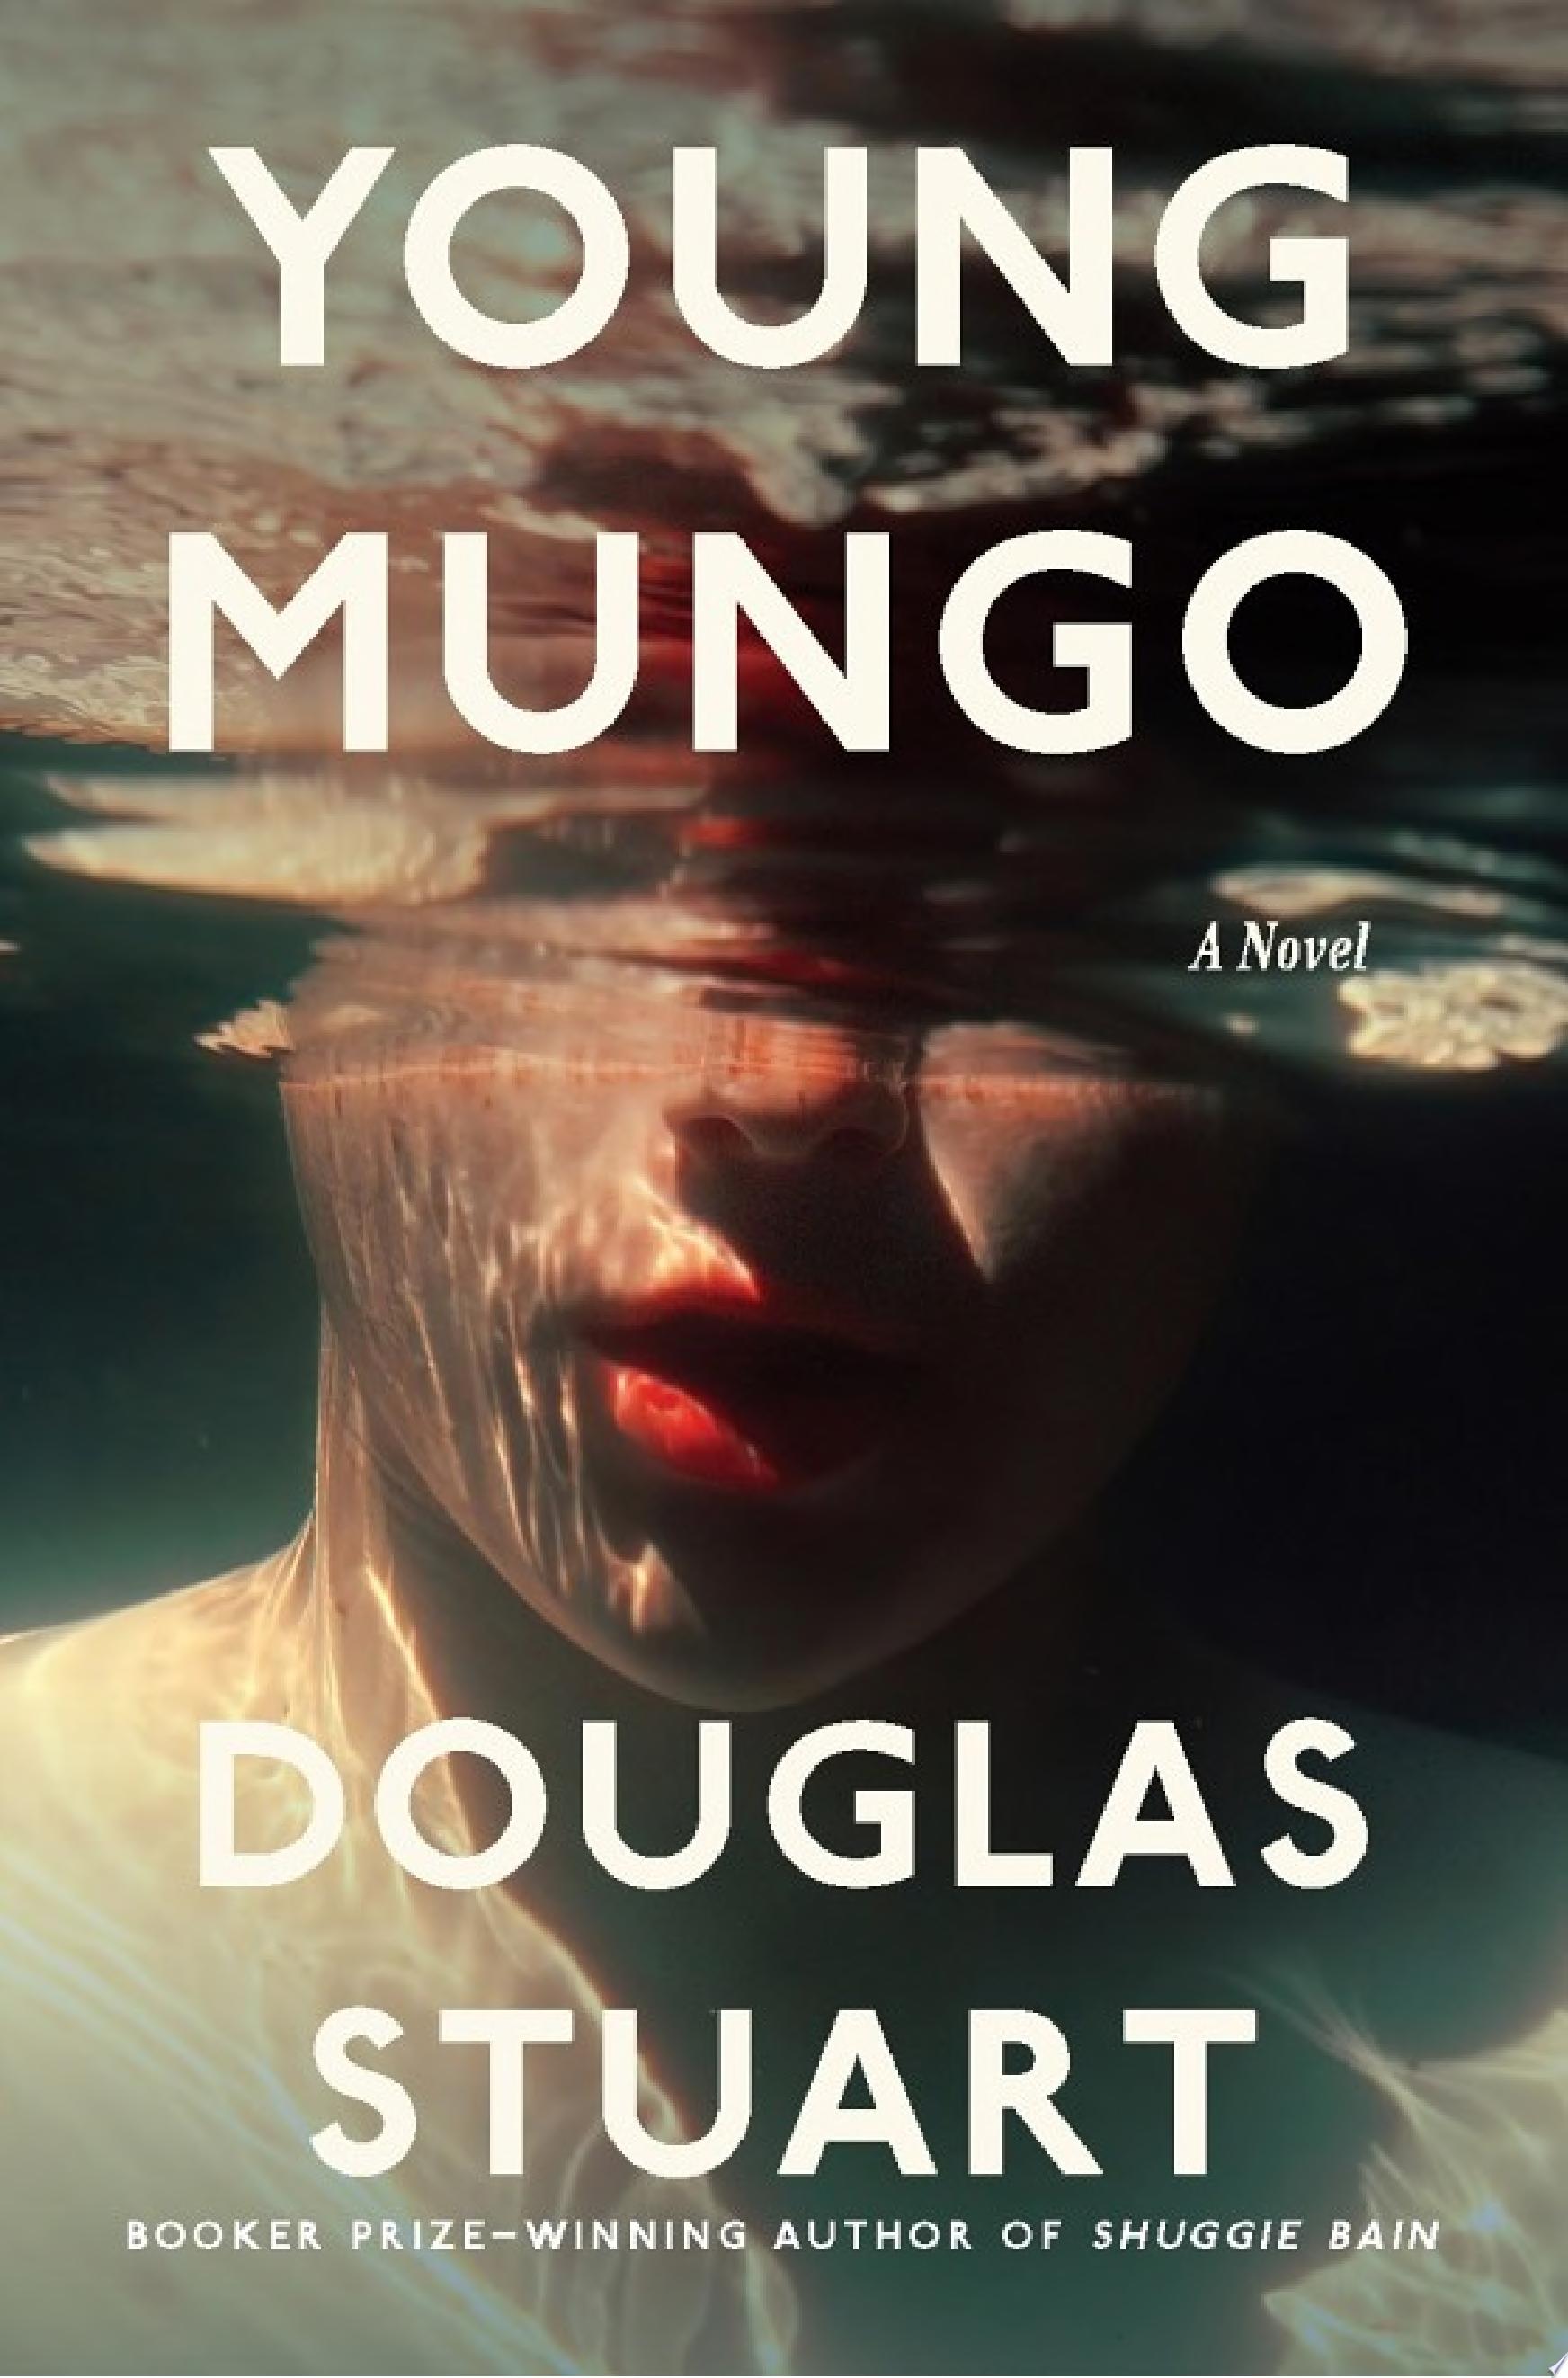 Image for "Young Mungo"